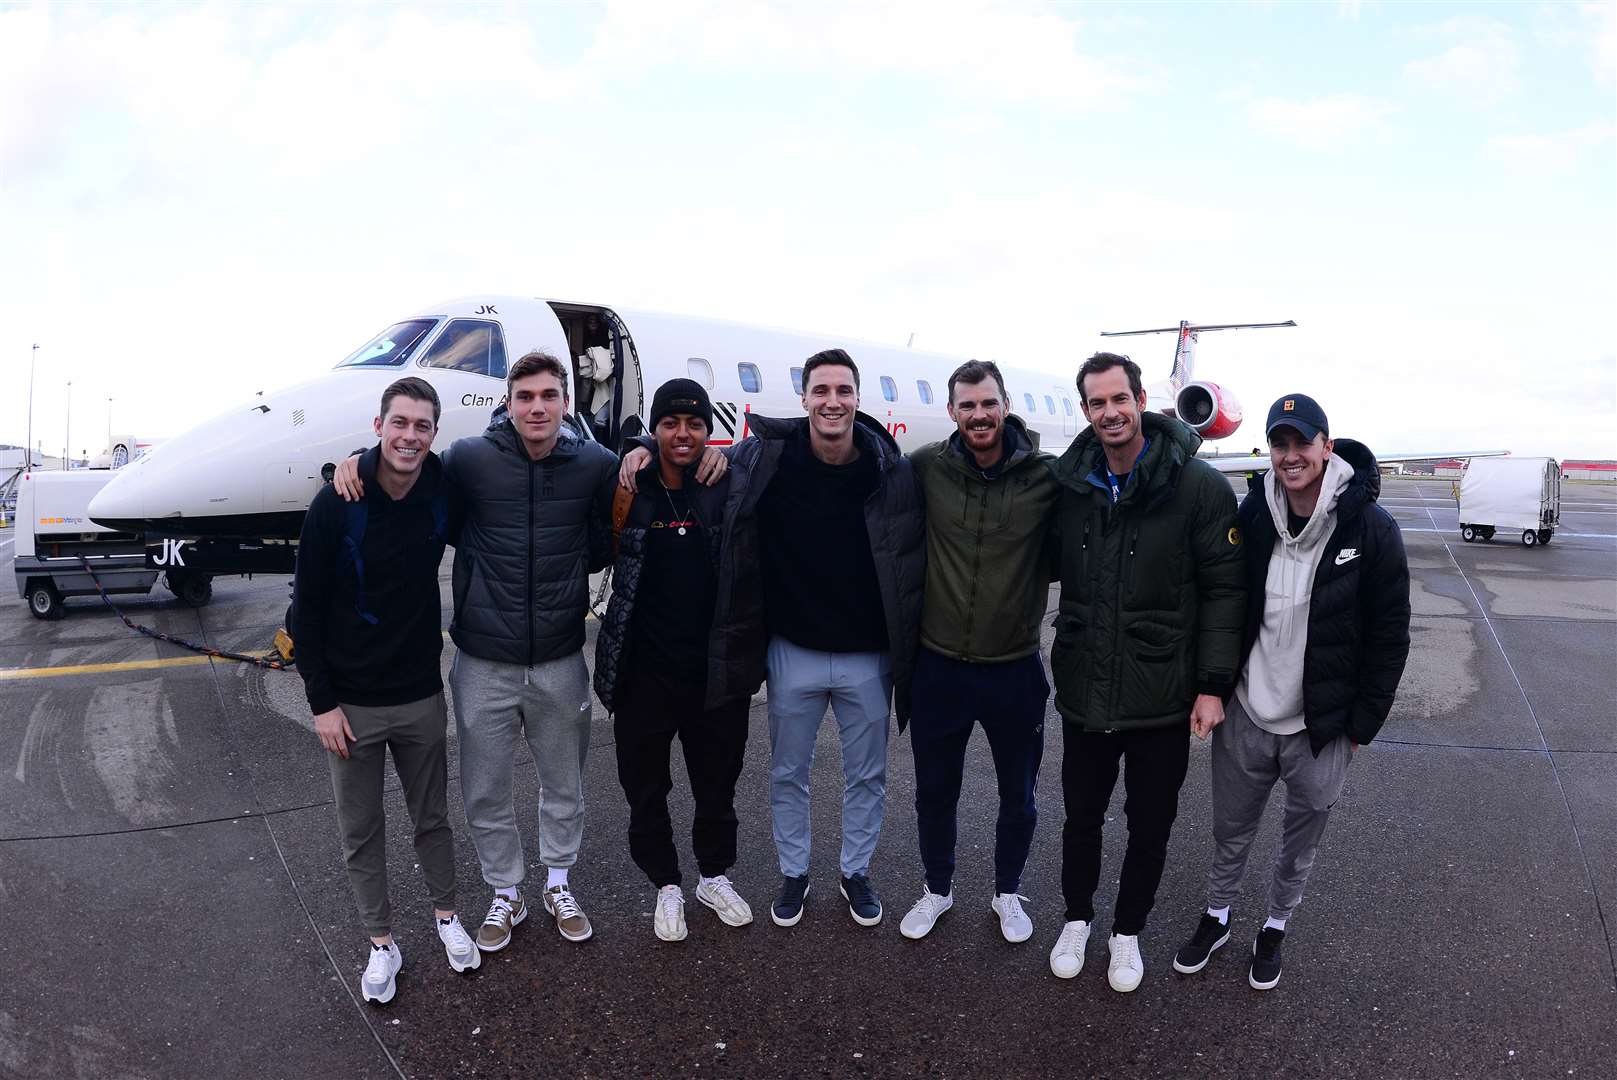 Tennis legends Jamie and Sir Andy Murray have arrived in Aberdeen with the rest of the players ahead of Schroders Battle of the Brits – Scotland versus England.